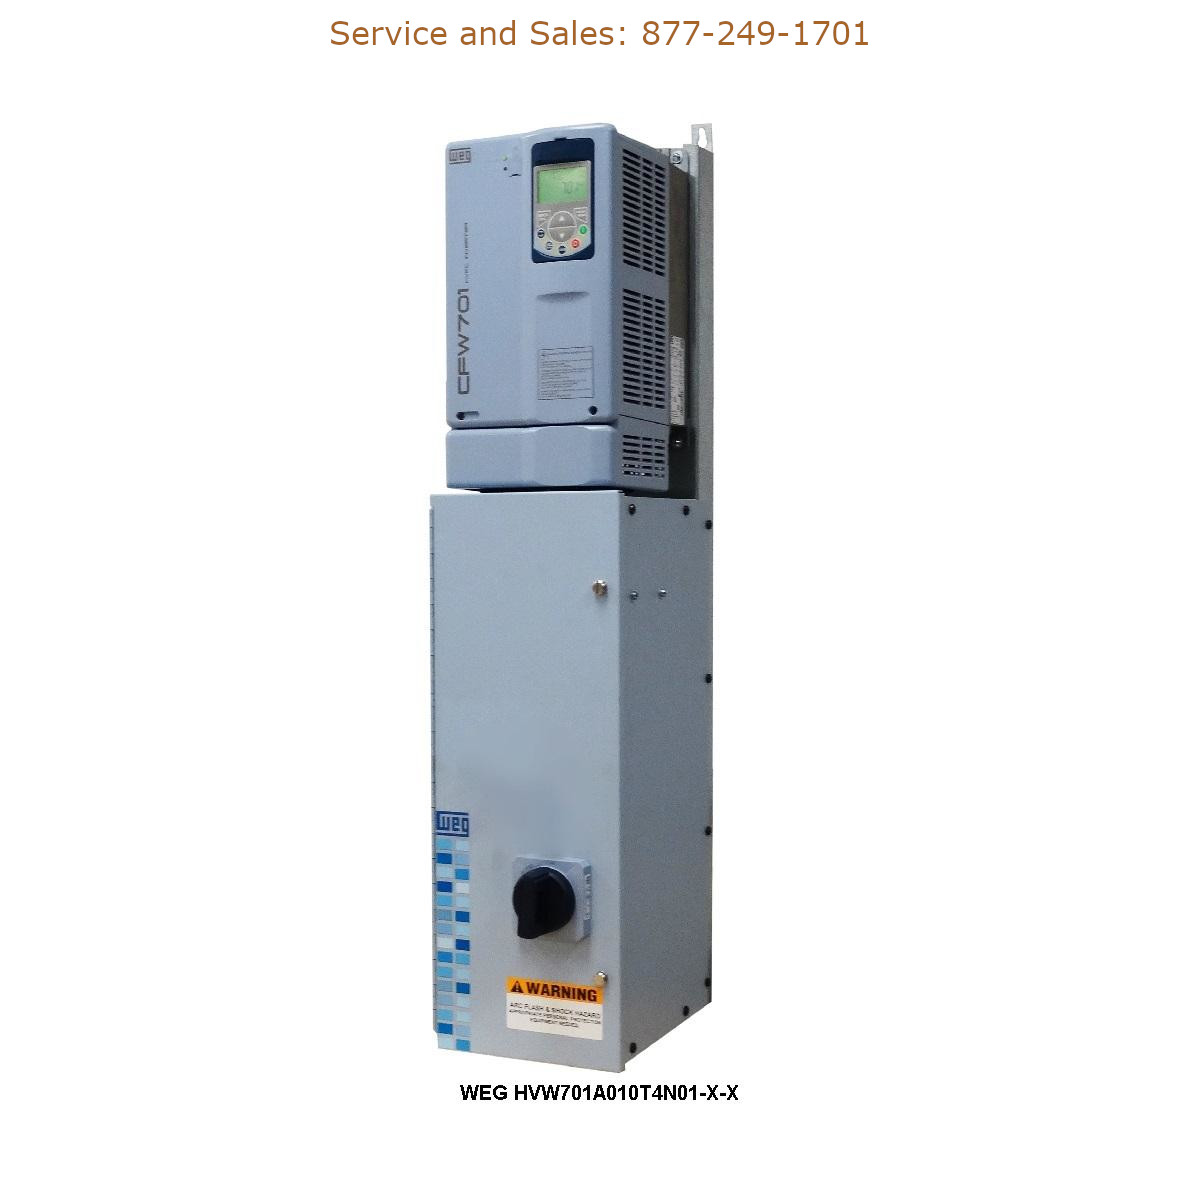 WEG HVW701A010T4N01-X-X WEG Model Number HVW701A010T4N01-X-X WEG Drives, Variable Speed Drives Repair Service, Troubleshooting, Replacement Parts https://gesrepair.com/wp-content/uploads/2022/WEG/WEG_HVW701A010T4N01-X-X_Drives_Variable_Speed_Drives.jpg